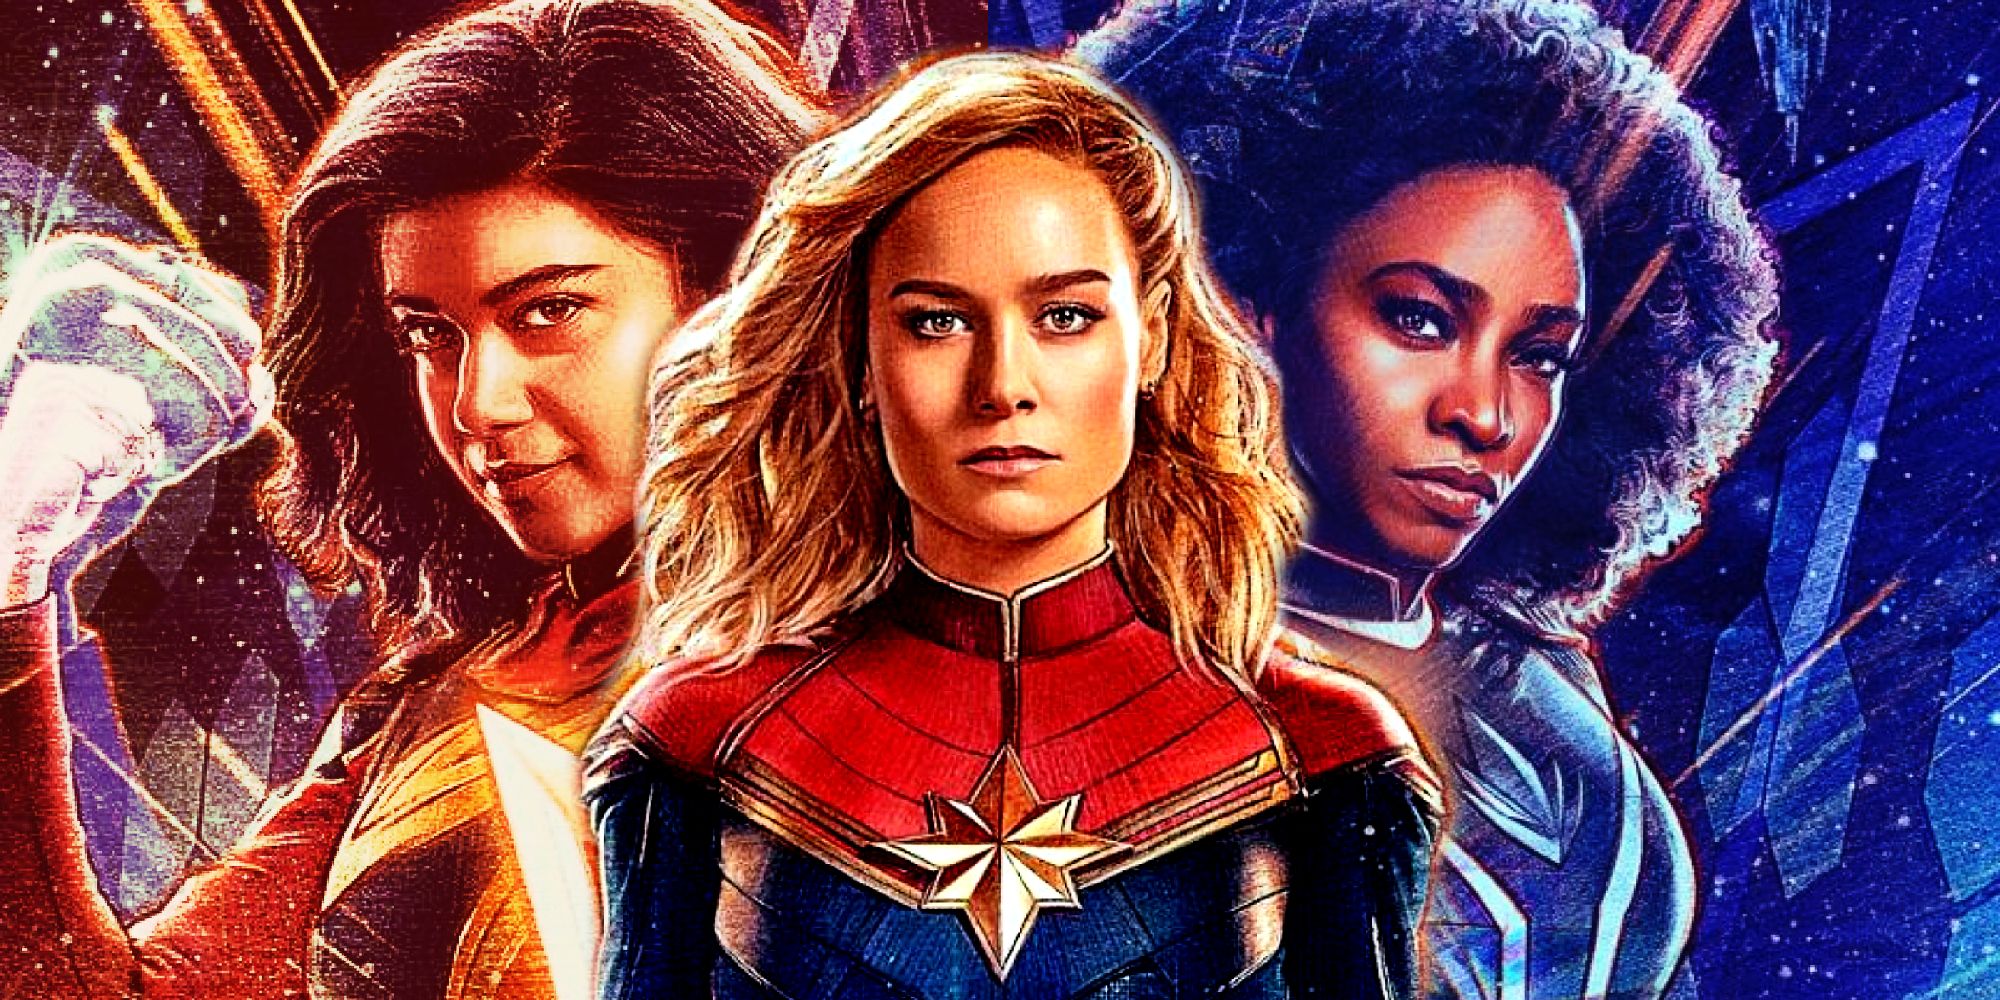 Brie Larson, Iman Vellani, and Teyonah Parris in an artistic render for The Marvels' poster